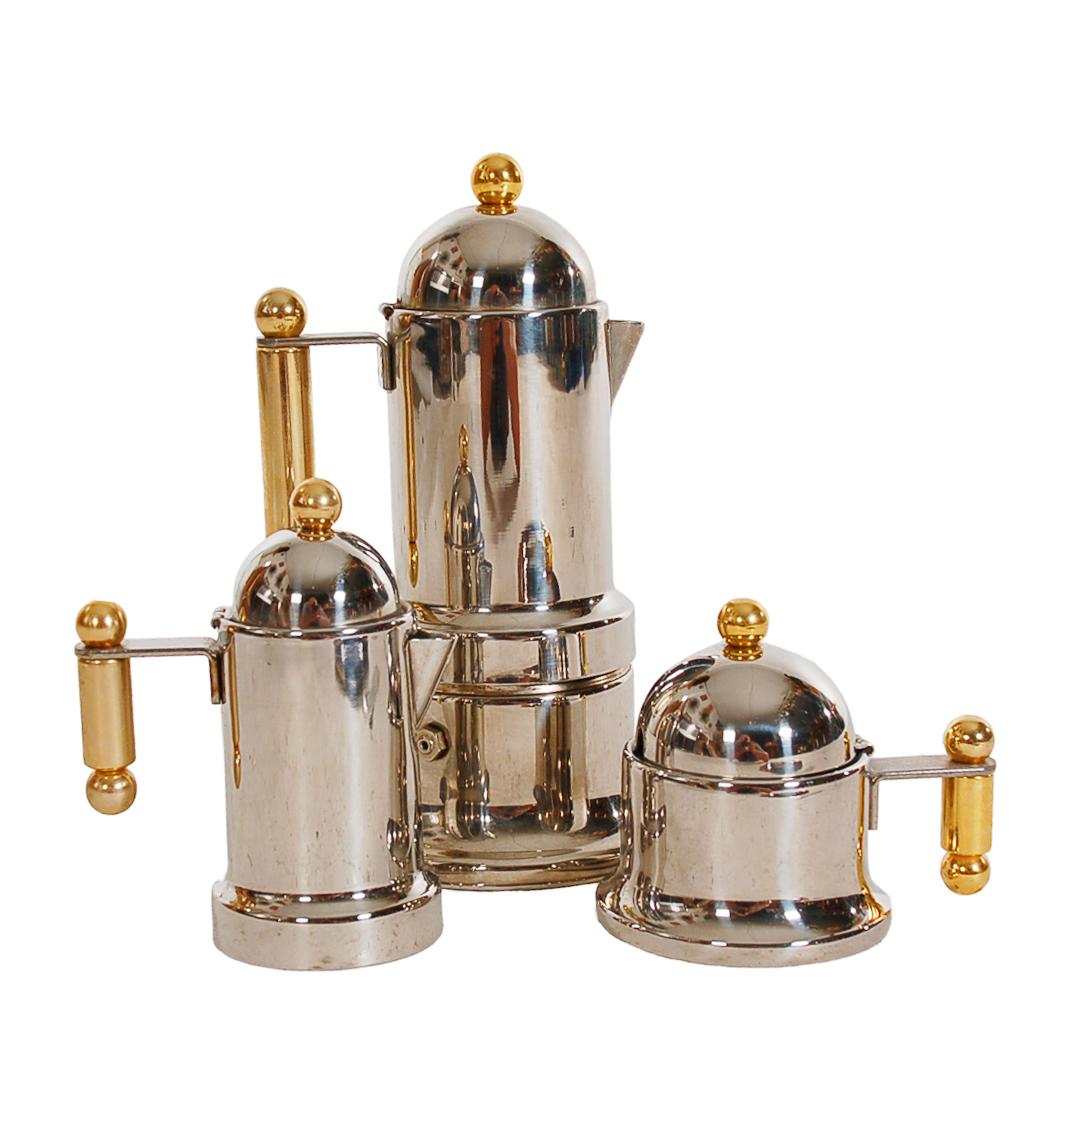 A vintage, unused, stovetop espresso maker from Italy circa 1970s. It features all stainless steel and brass construction. Comes with espresso maker, creamer, sugar caddy, and tray as shown.